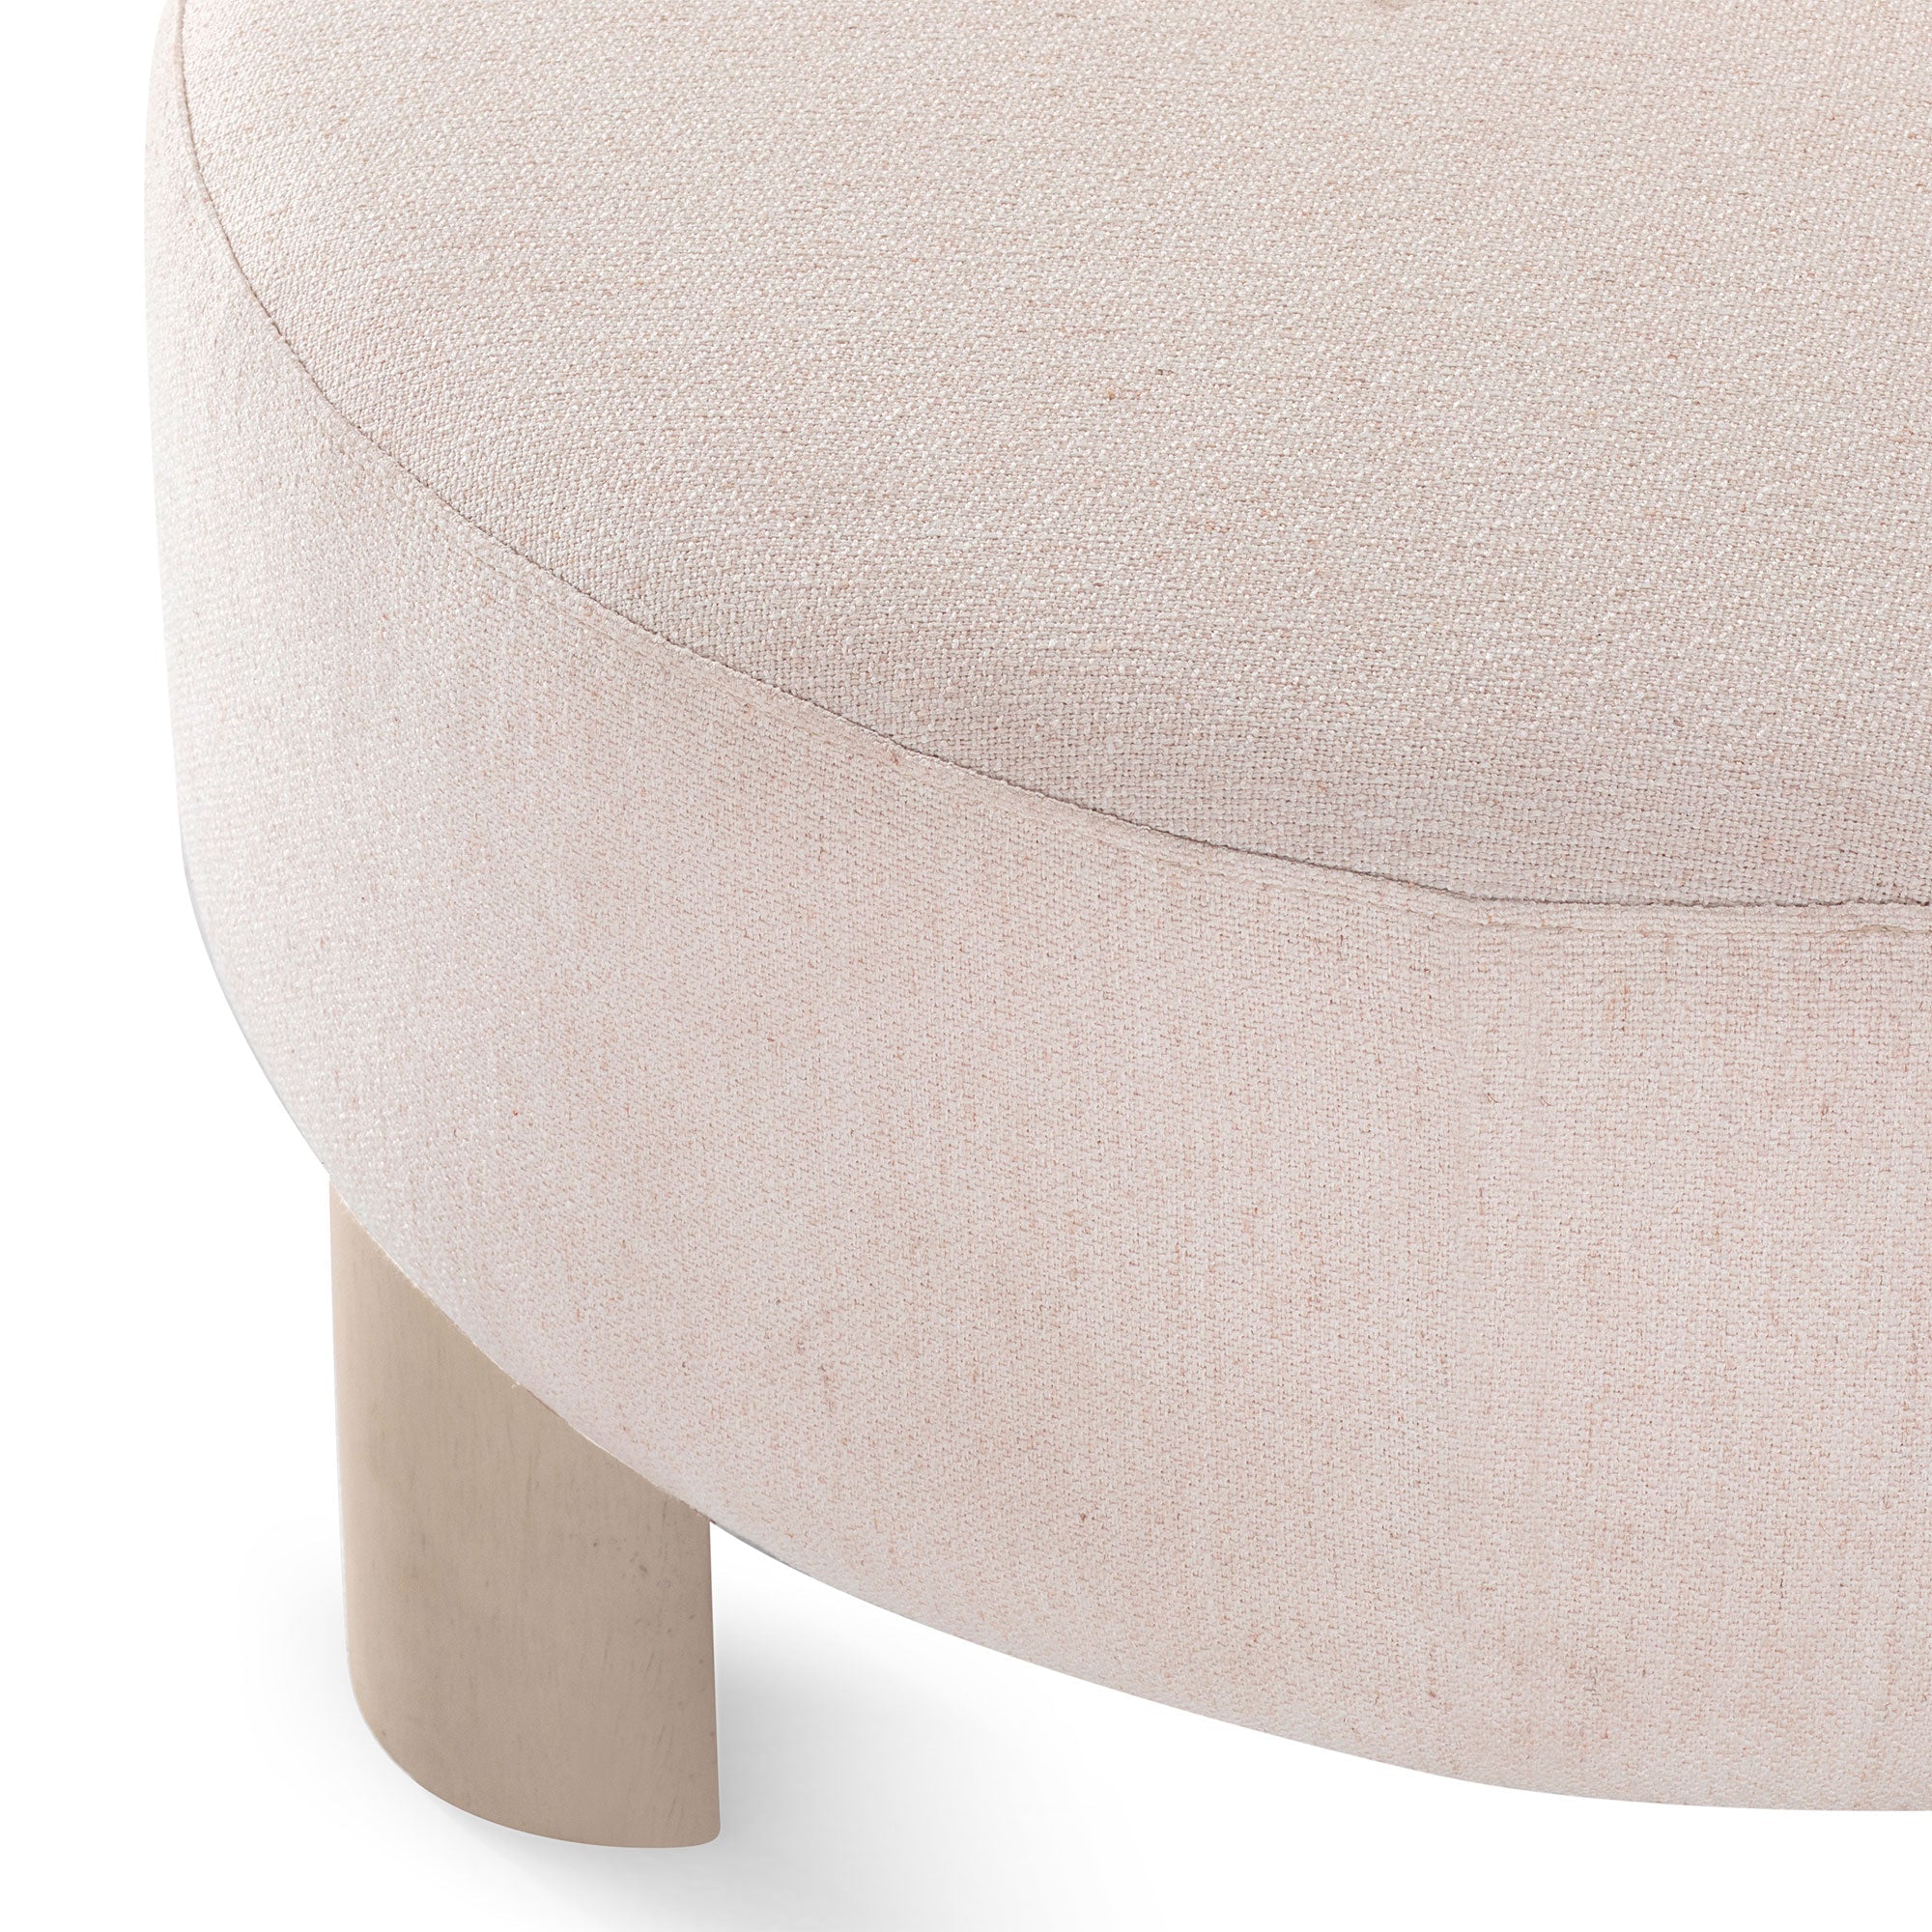 Celia Contemporary Upholstered Ottoman with Refined White Wood Finish in Ottomans & Benches by Maven Lane